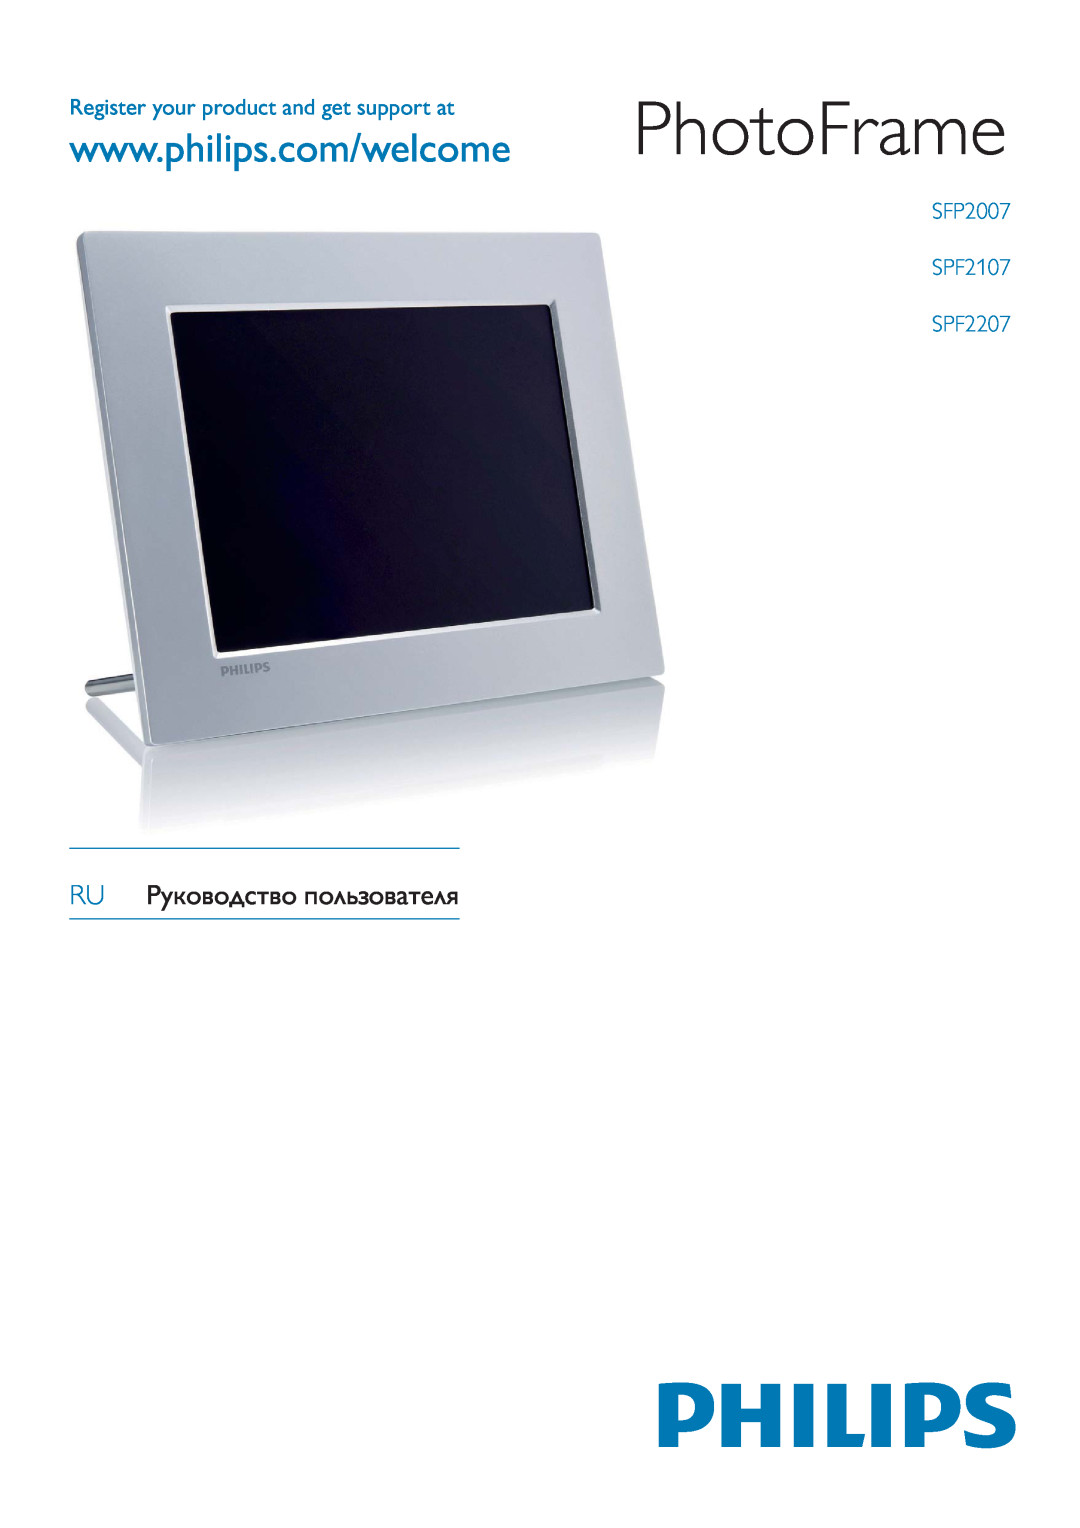 Philips SPF2107, SPF2207, SPF2007 quick start Quick start guide, Get started Use your PhotoFrame Setup 